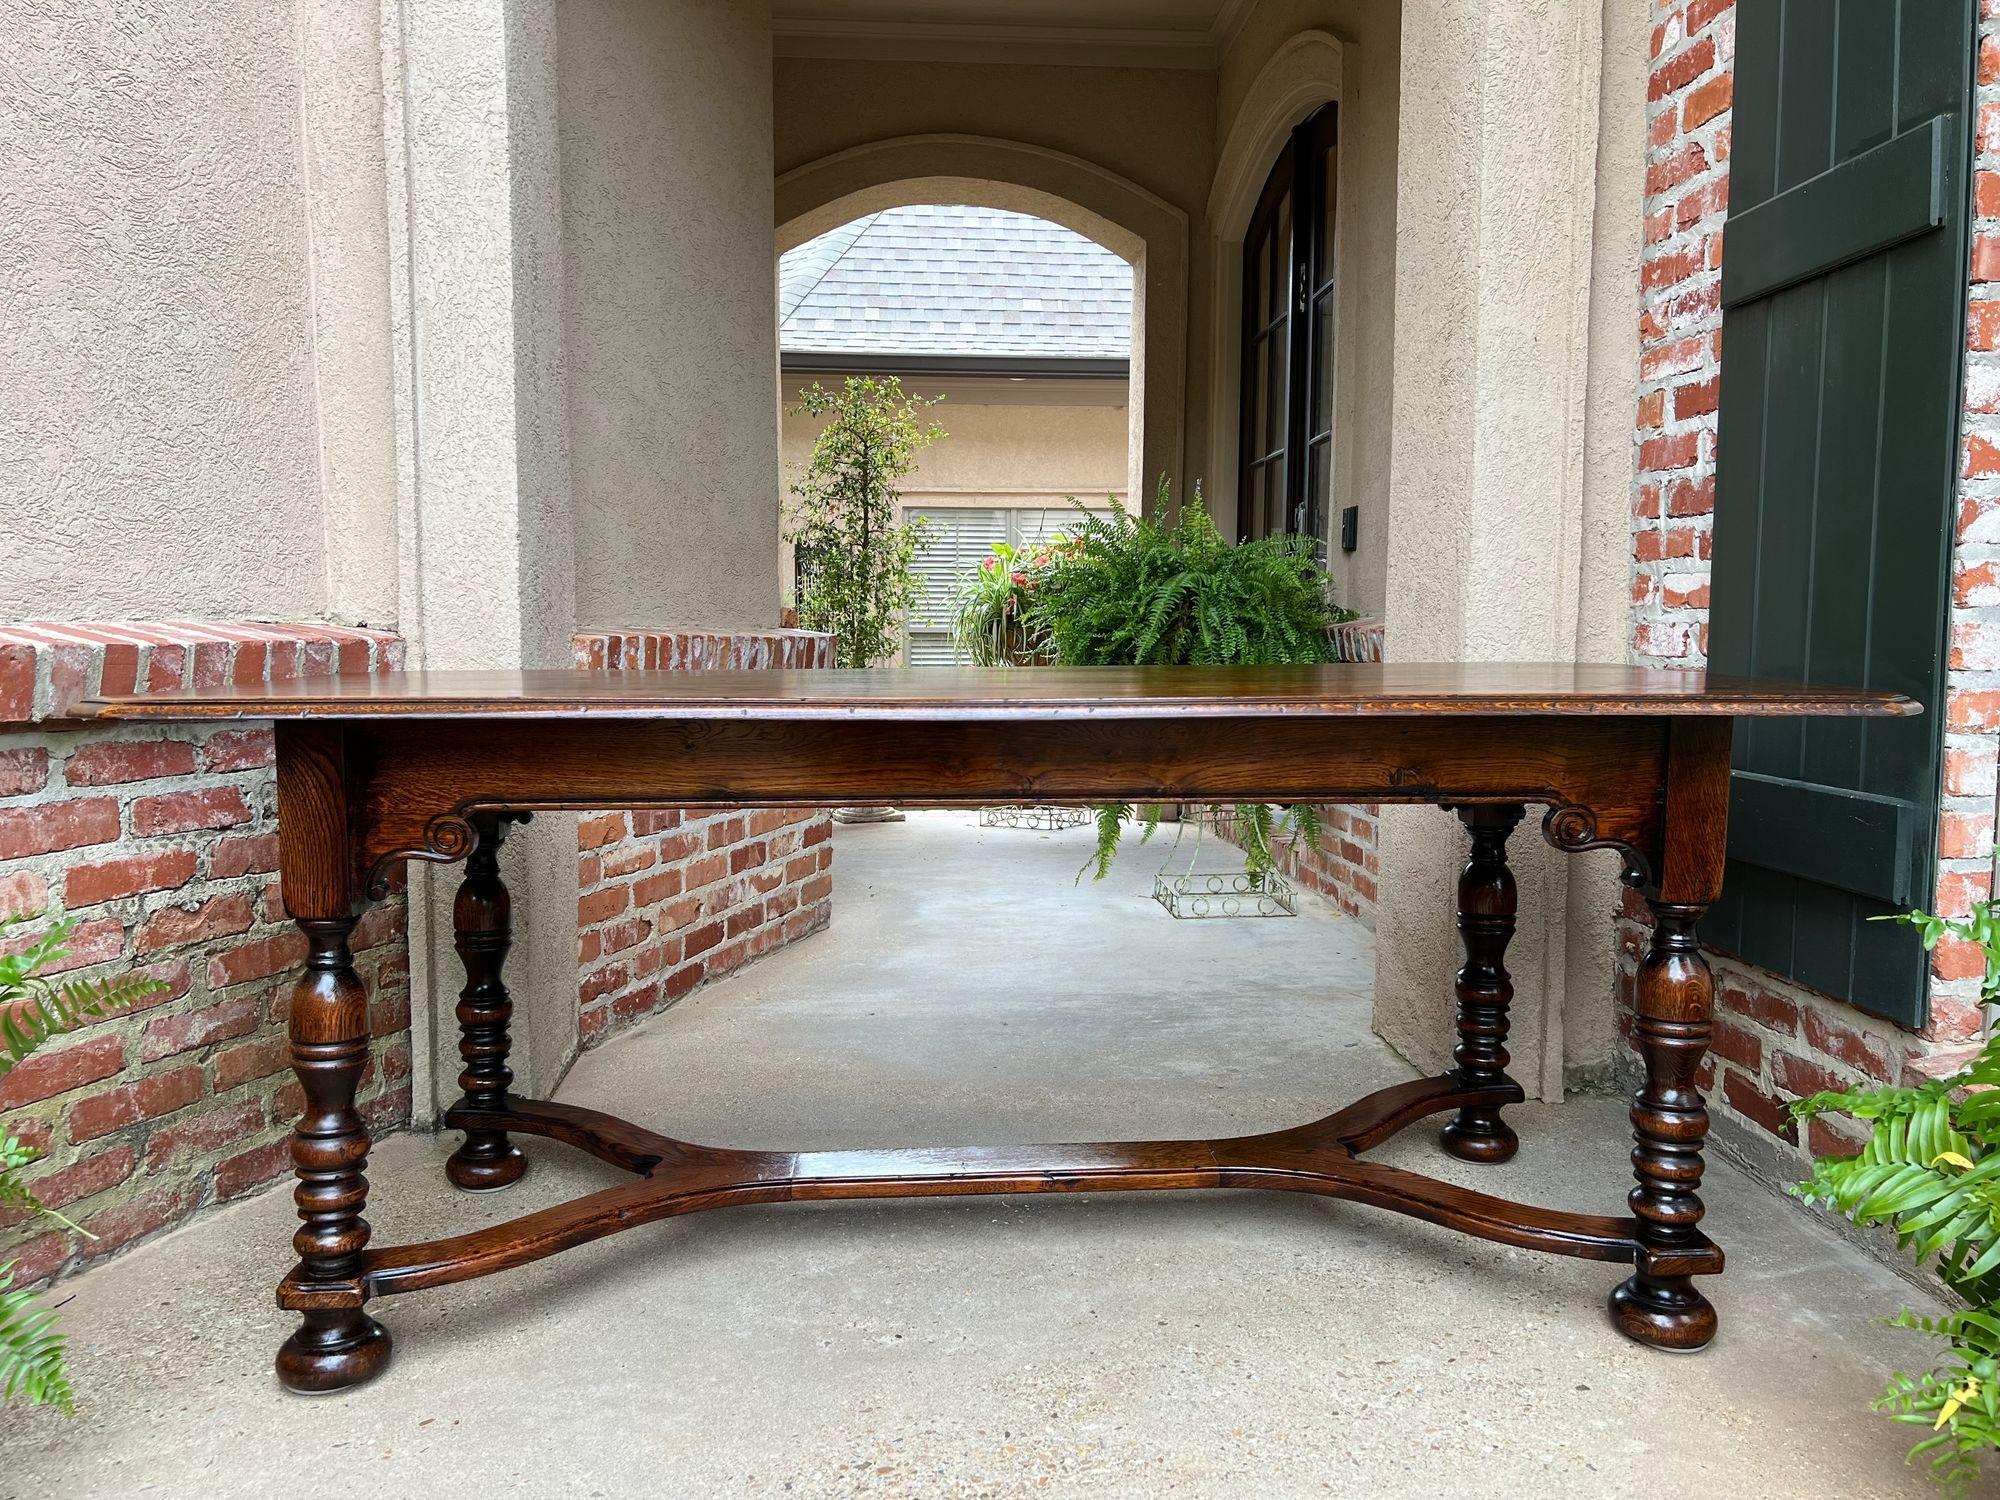 Antique French Farm Table Dining Library Desk Carved Oak Farmhouse 6.5 ft. length.

Direct from France, a gorgeous antique French carved oak dining table or conference/library table in a large 78.5” (over 6.5 ft)!
These tables are one of our most